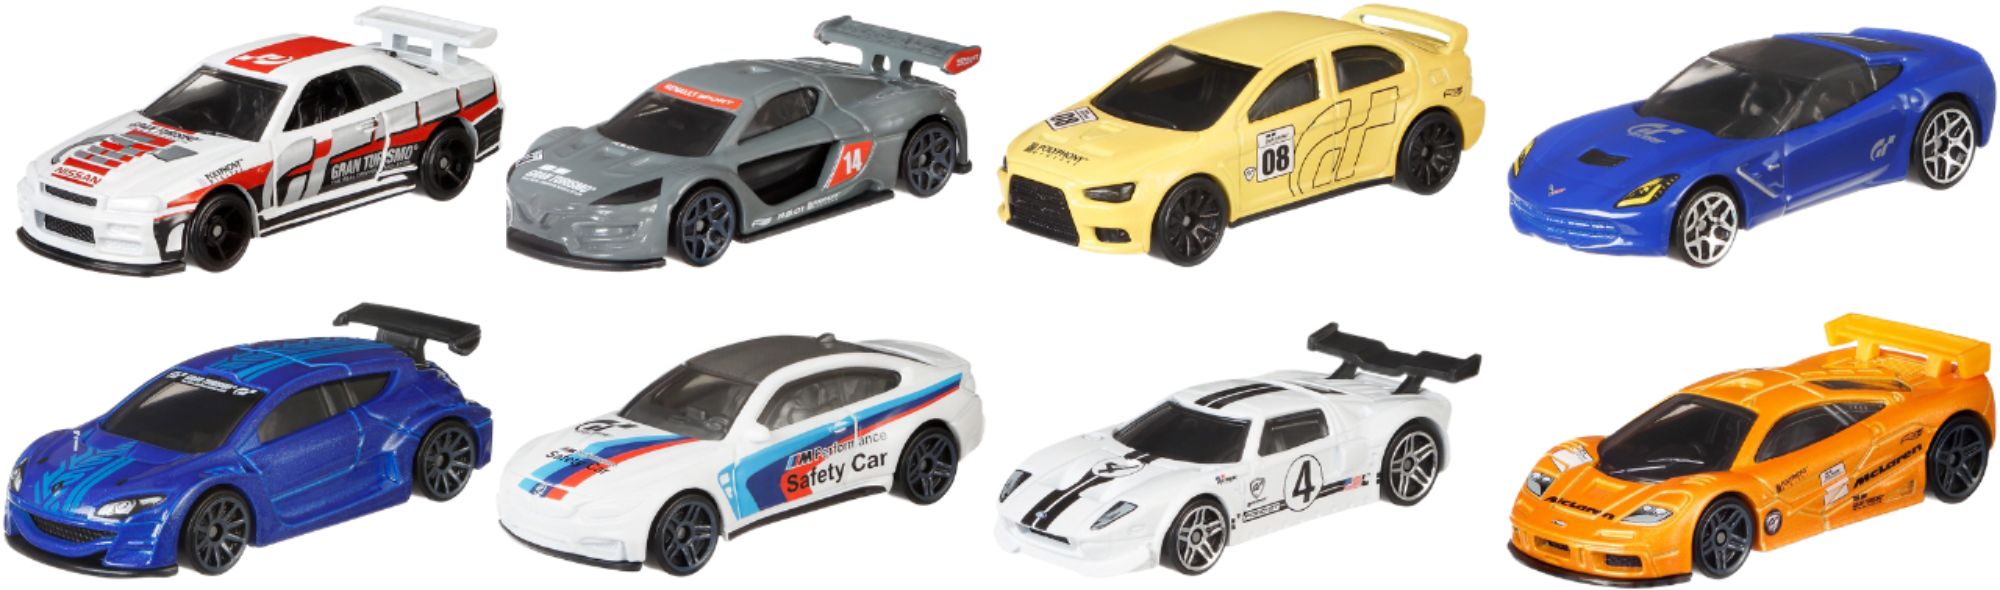 The story behind the Gran Turismo Nissans and where these Hot Wheels are  now – ORANGE TRACK DIECAST